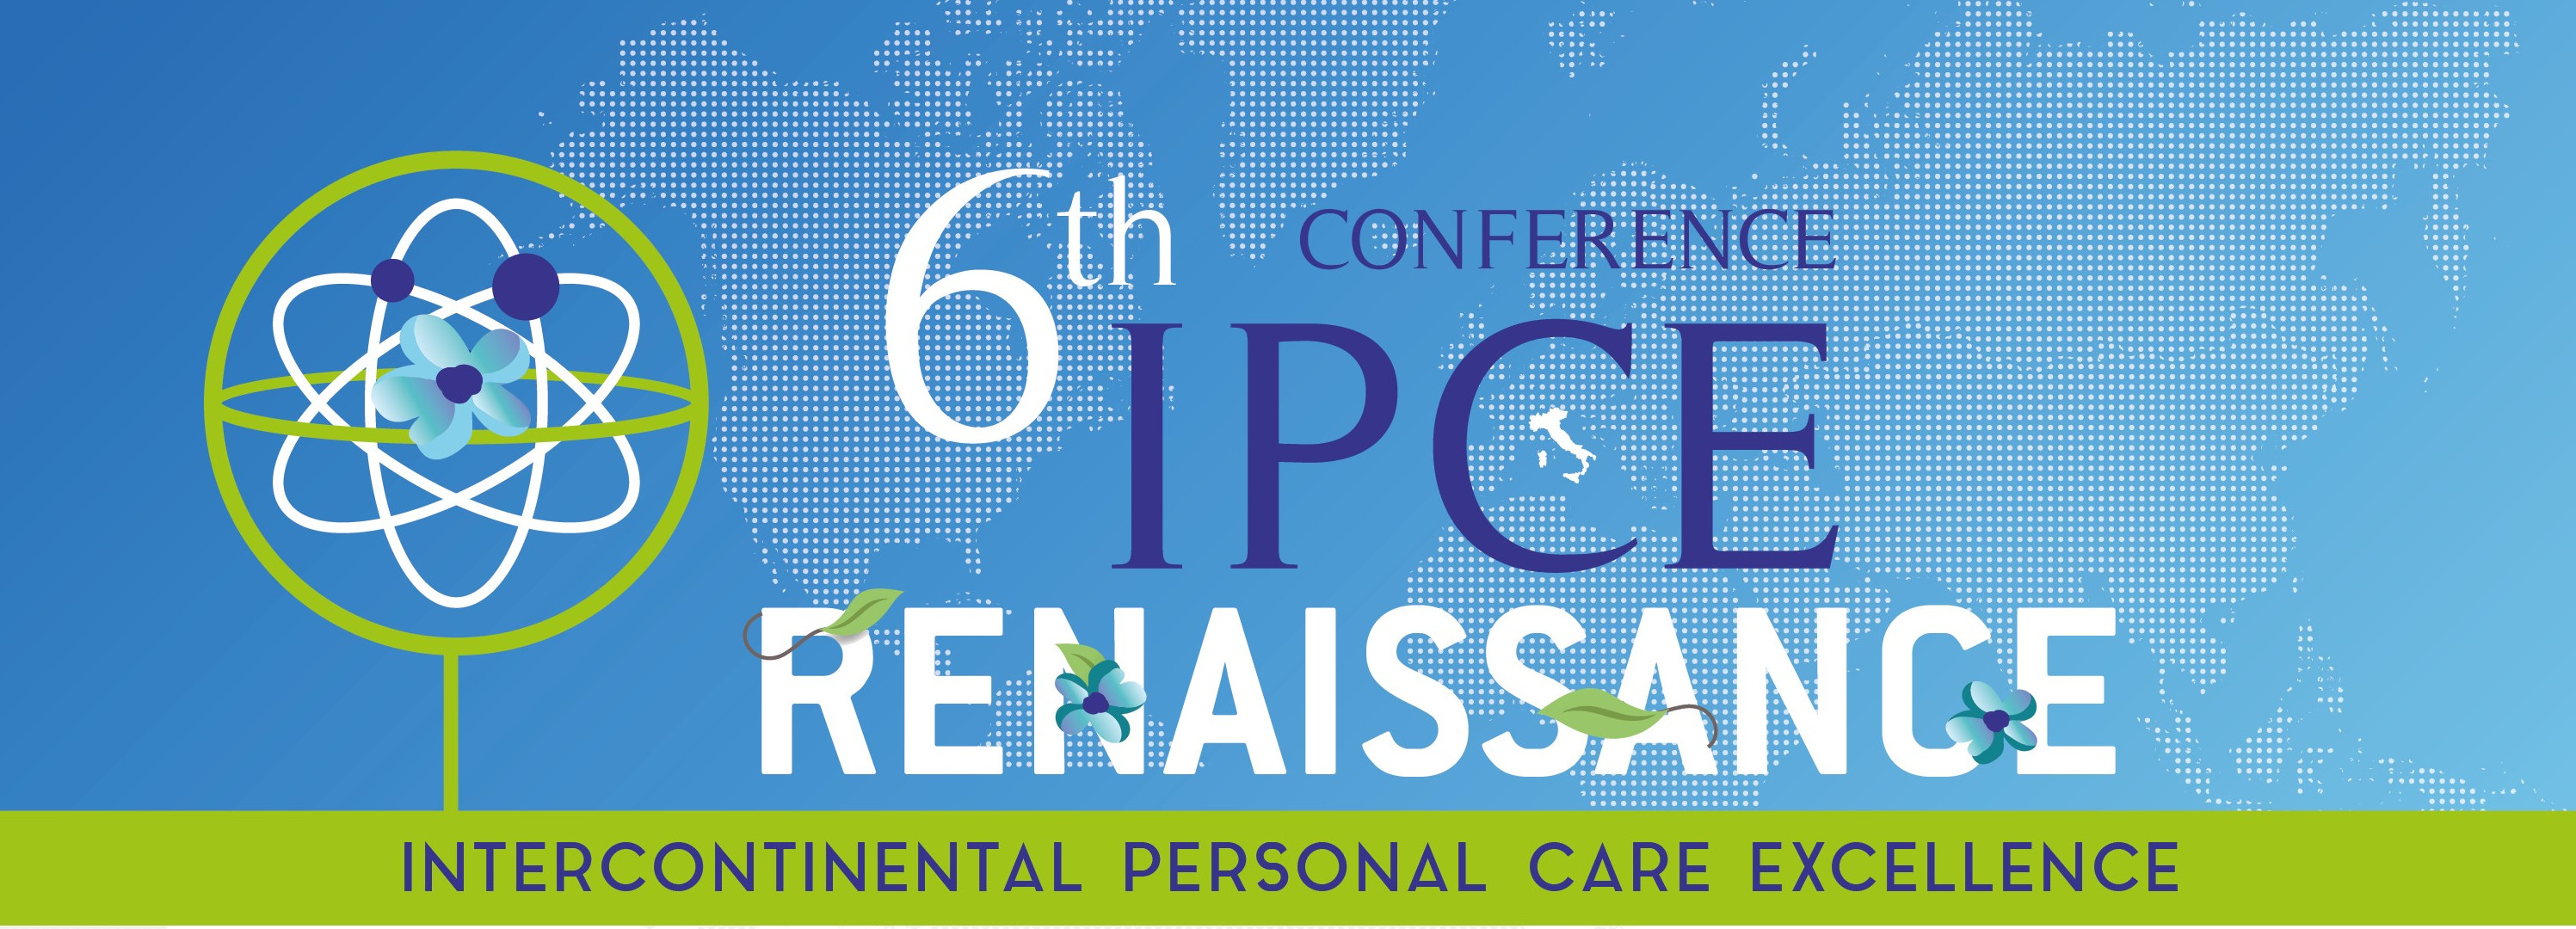 6th IPCE Conference - Postponed to 2023!